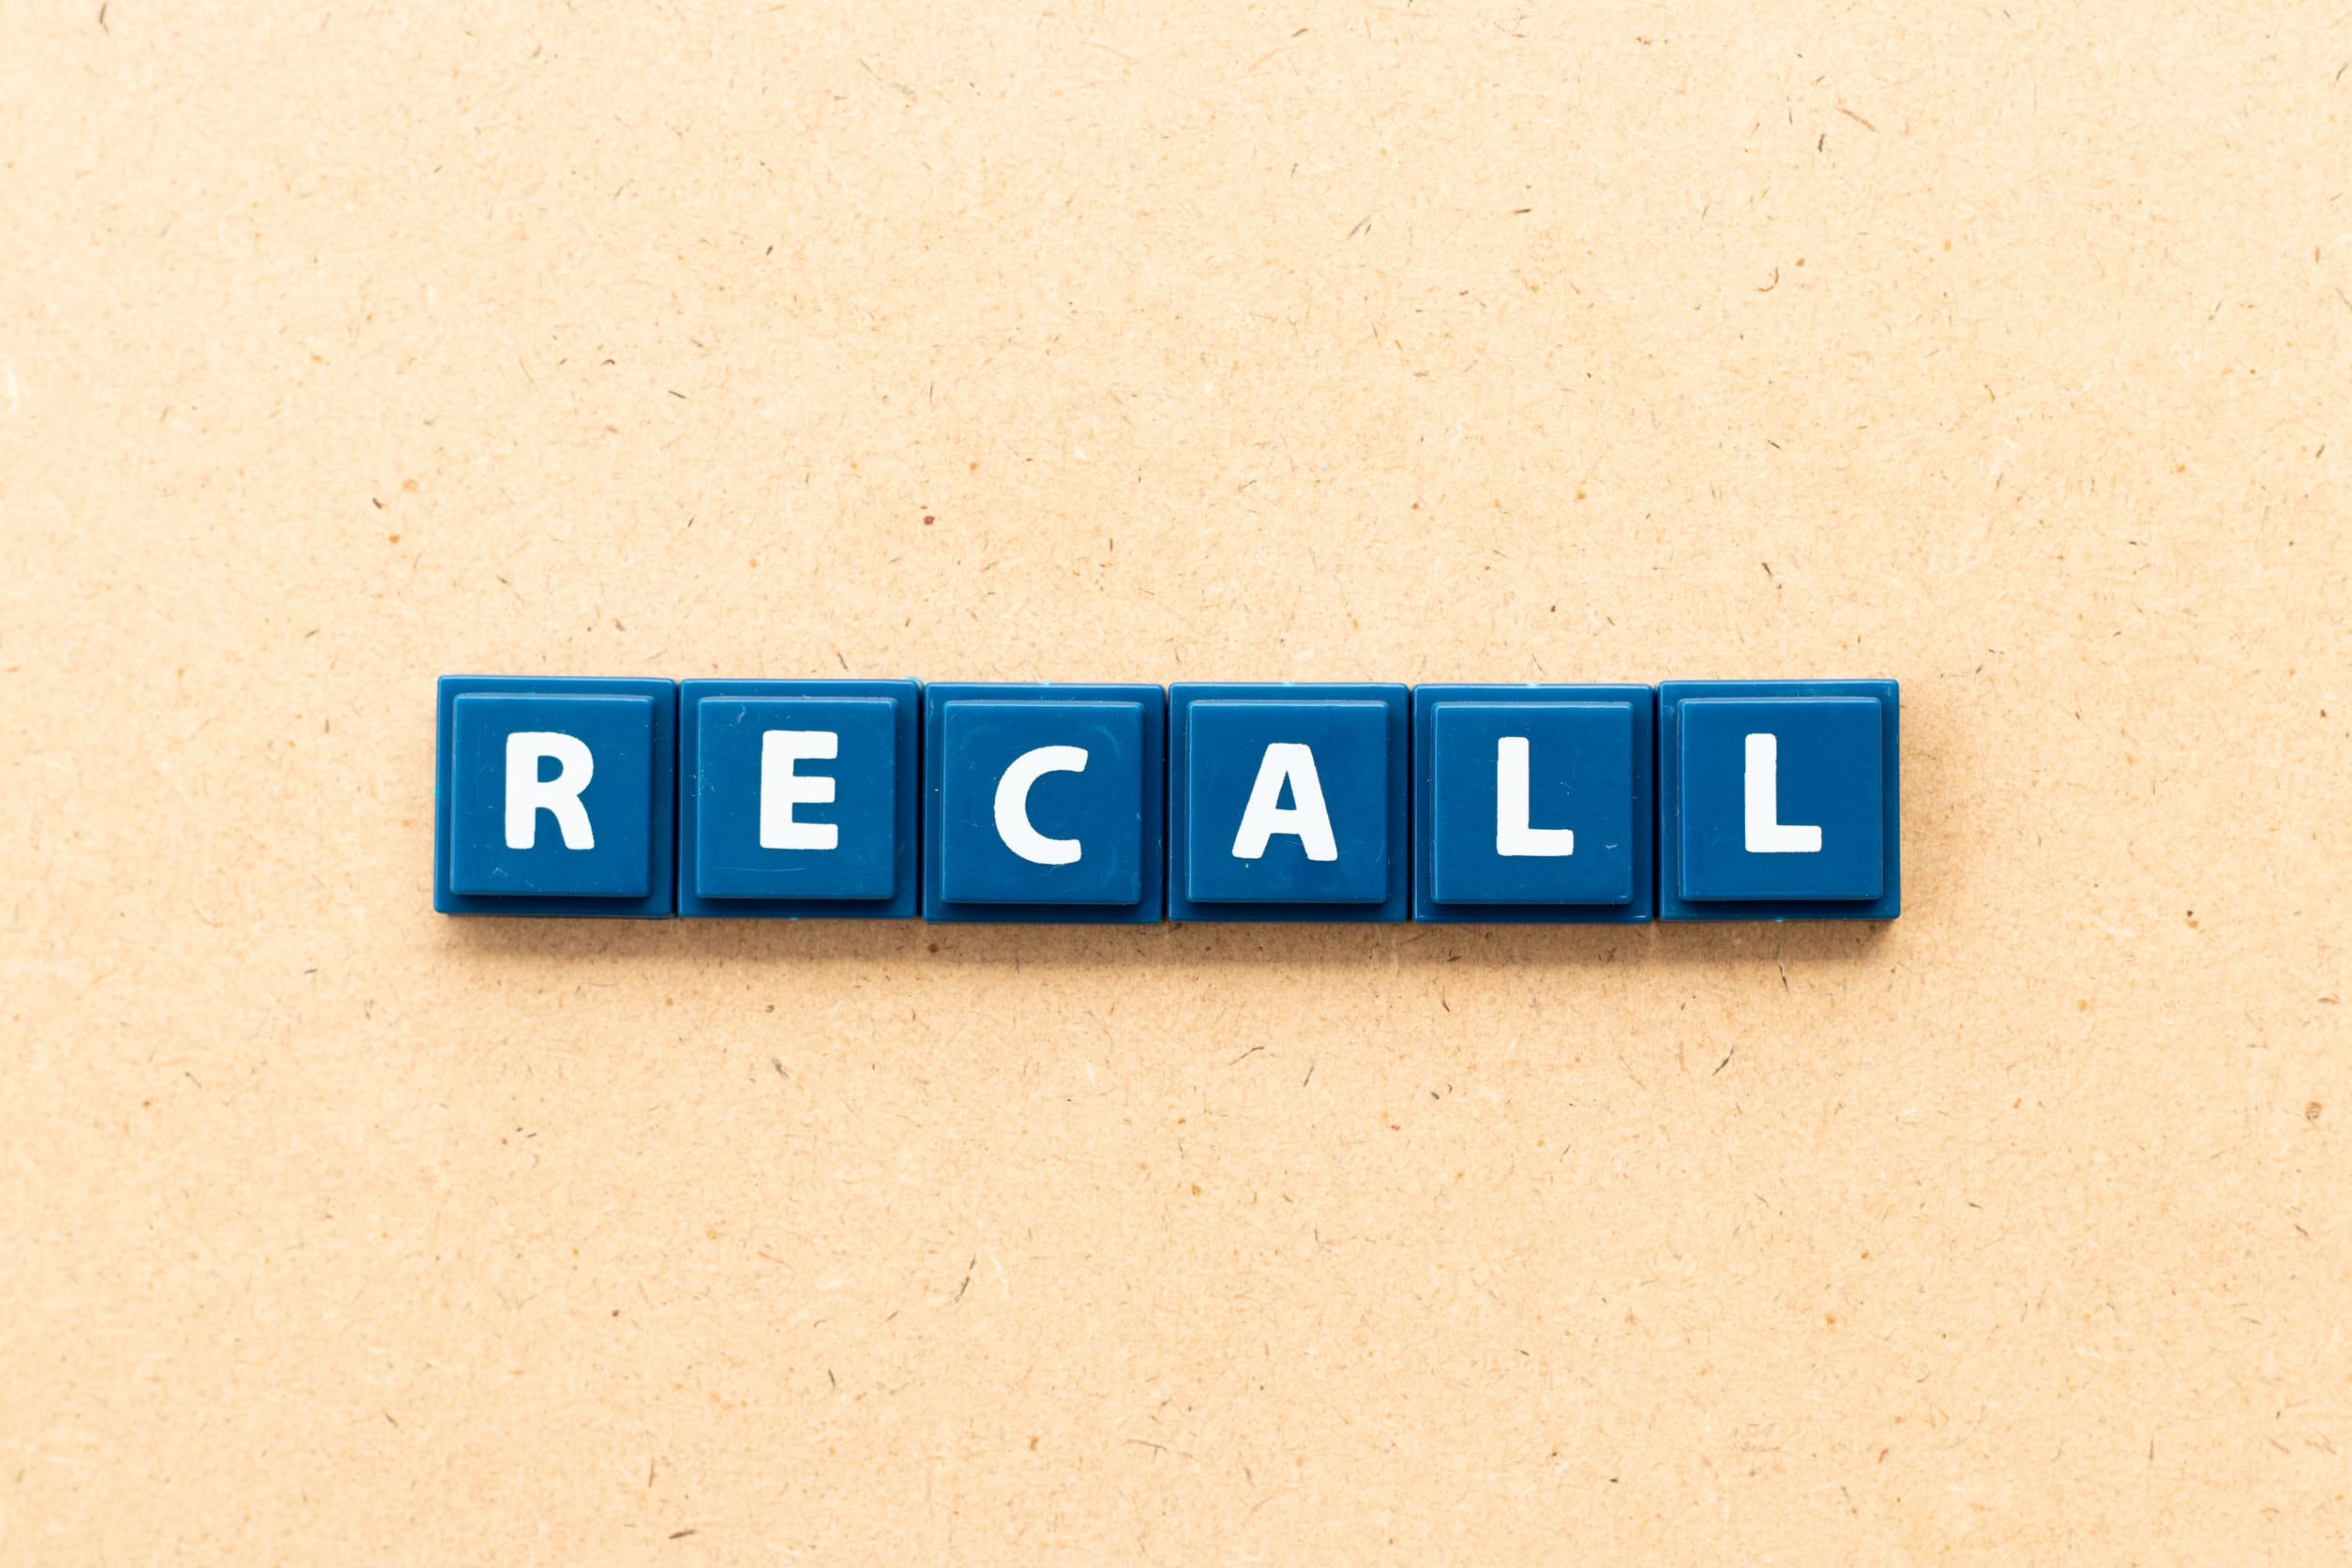 Florida Car Accident:  Was a Recalled Car Involved?